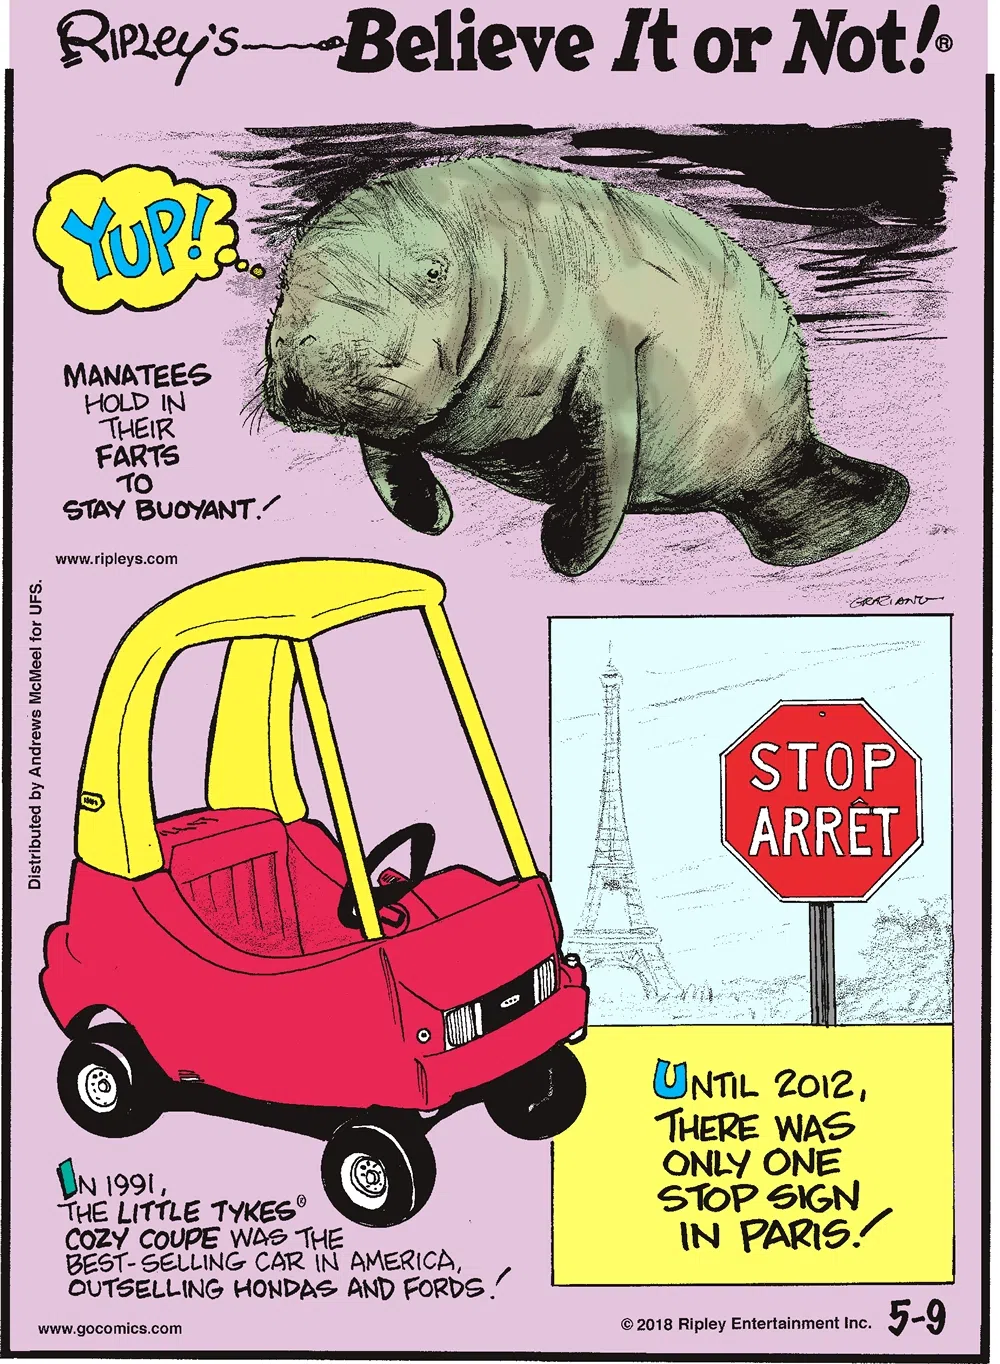 Manatees hold in their farts to stay buoyant!-------------------- In 1991, the Little Tykes Cozy Coupe was the best-selling car in America, outselling Hondas and Fords!-------------------- Until 2012, there was only one stop sign in Paris!